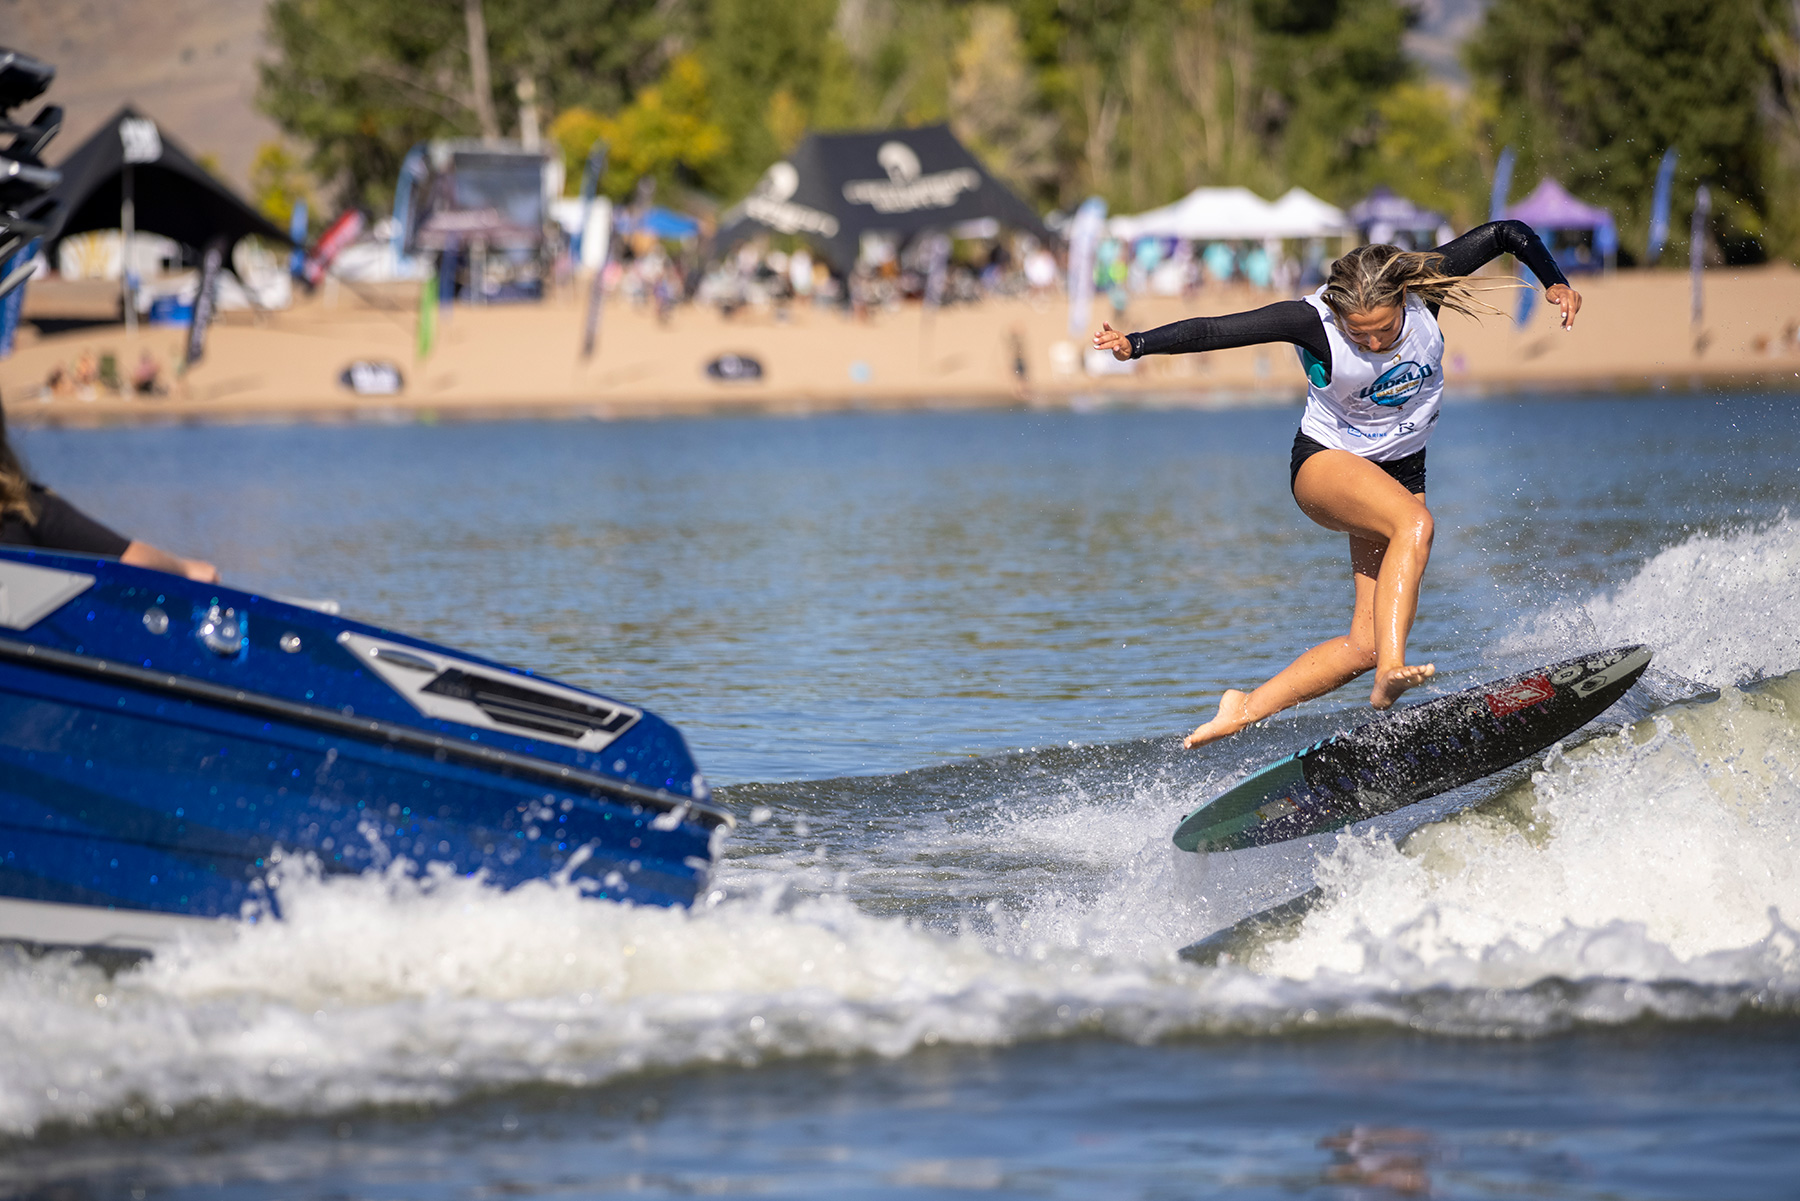 A woman is riding a surfboard on a lake, competing against other surfers.